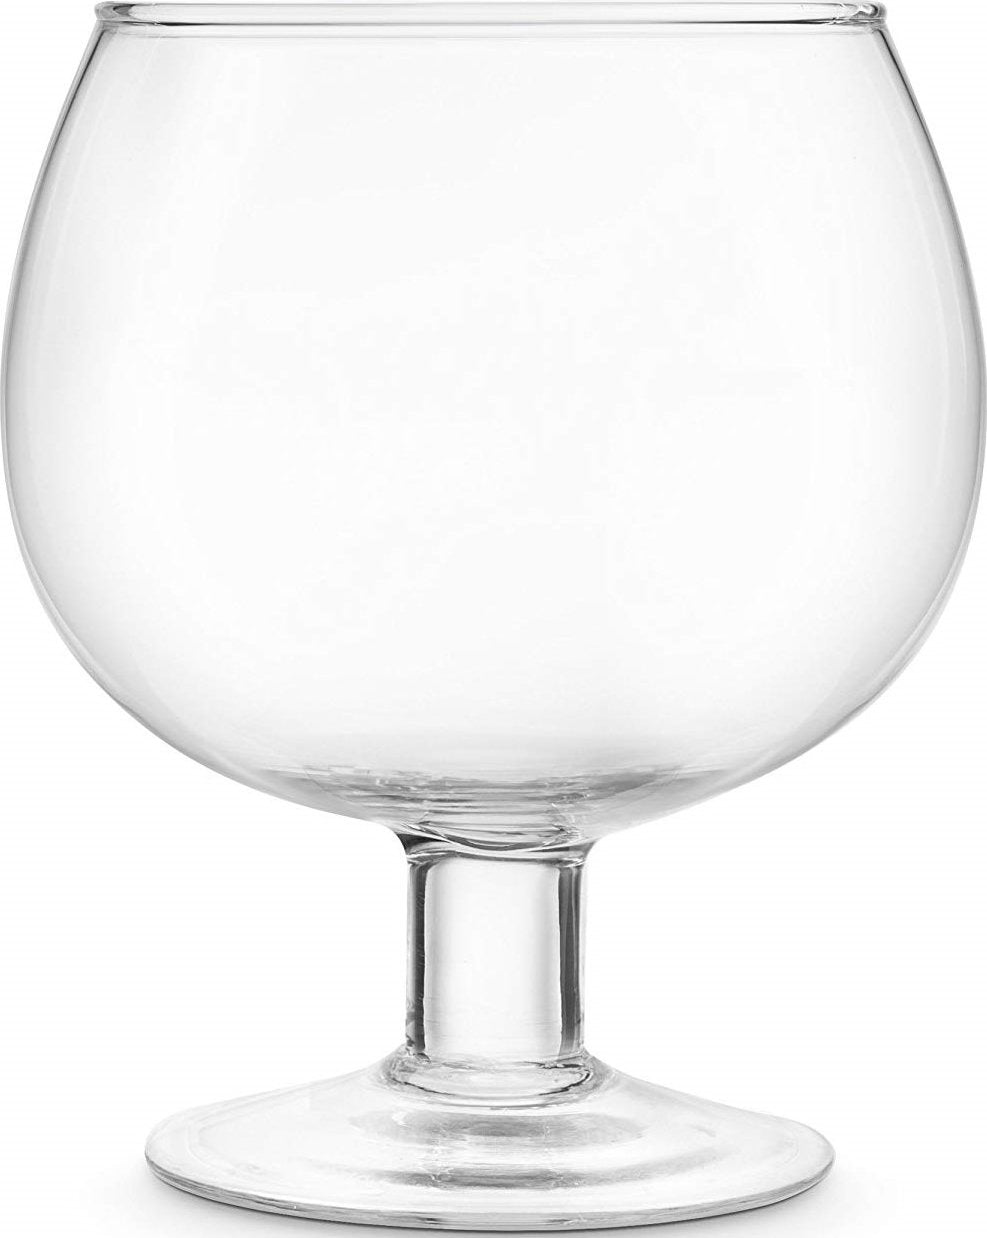 Final Touch - Fishbowl Glass - FTA1870